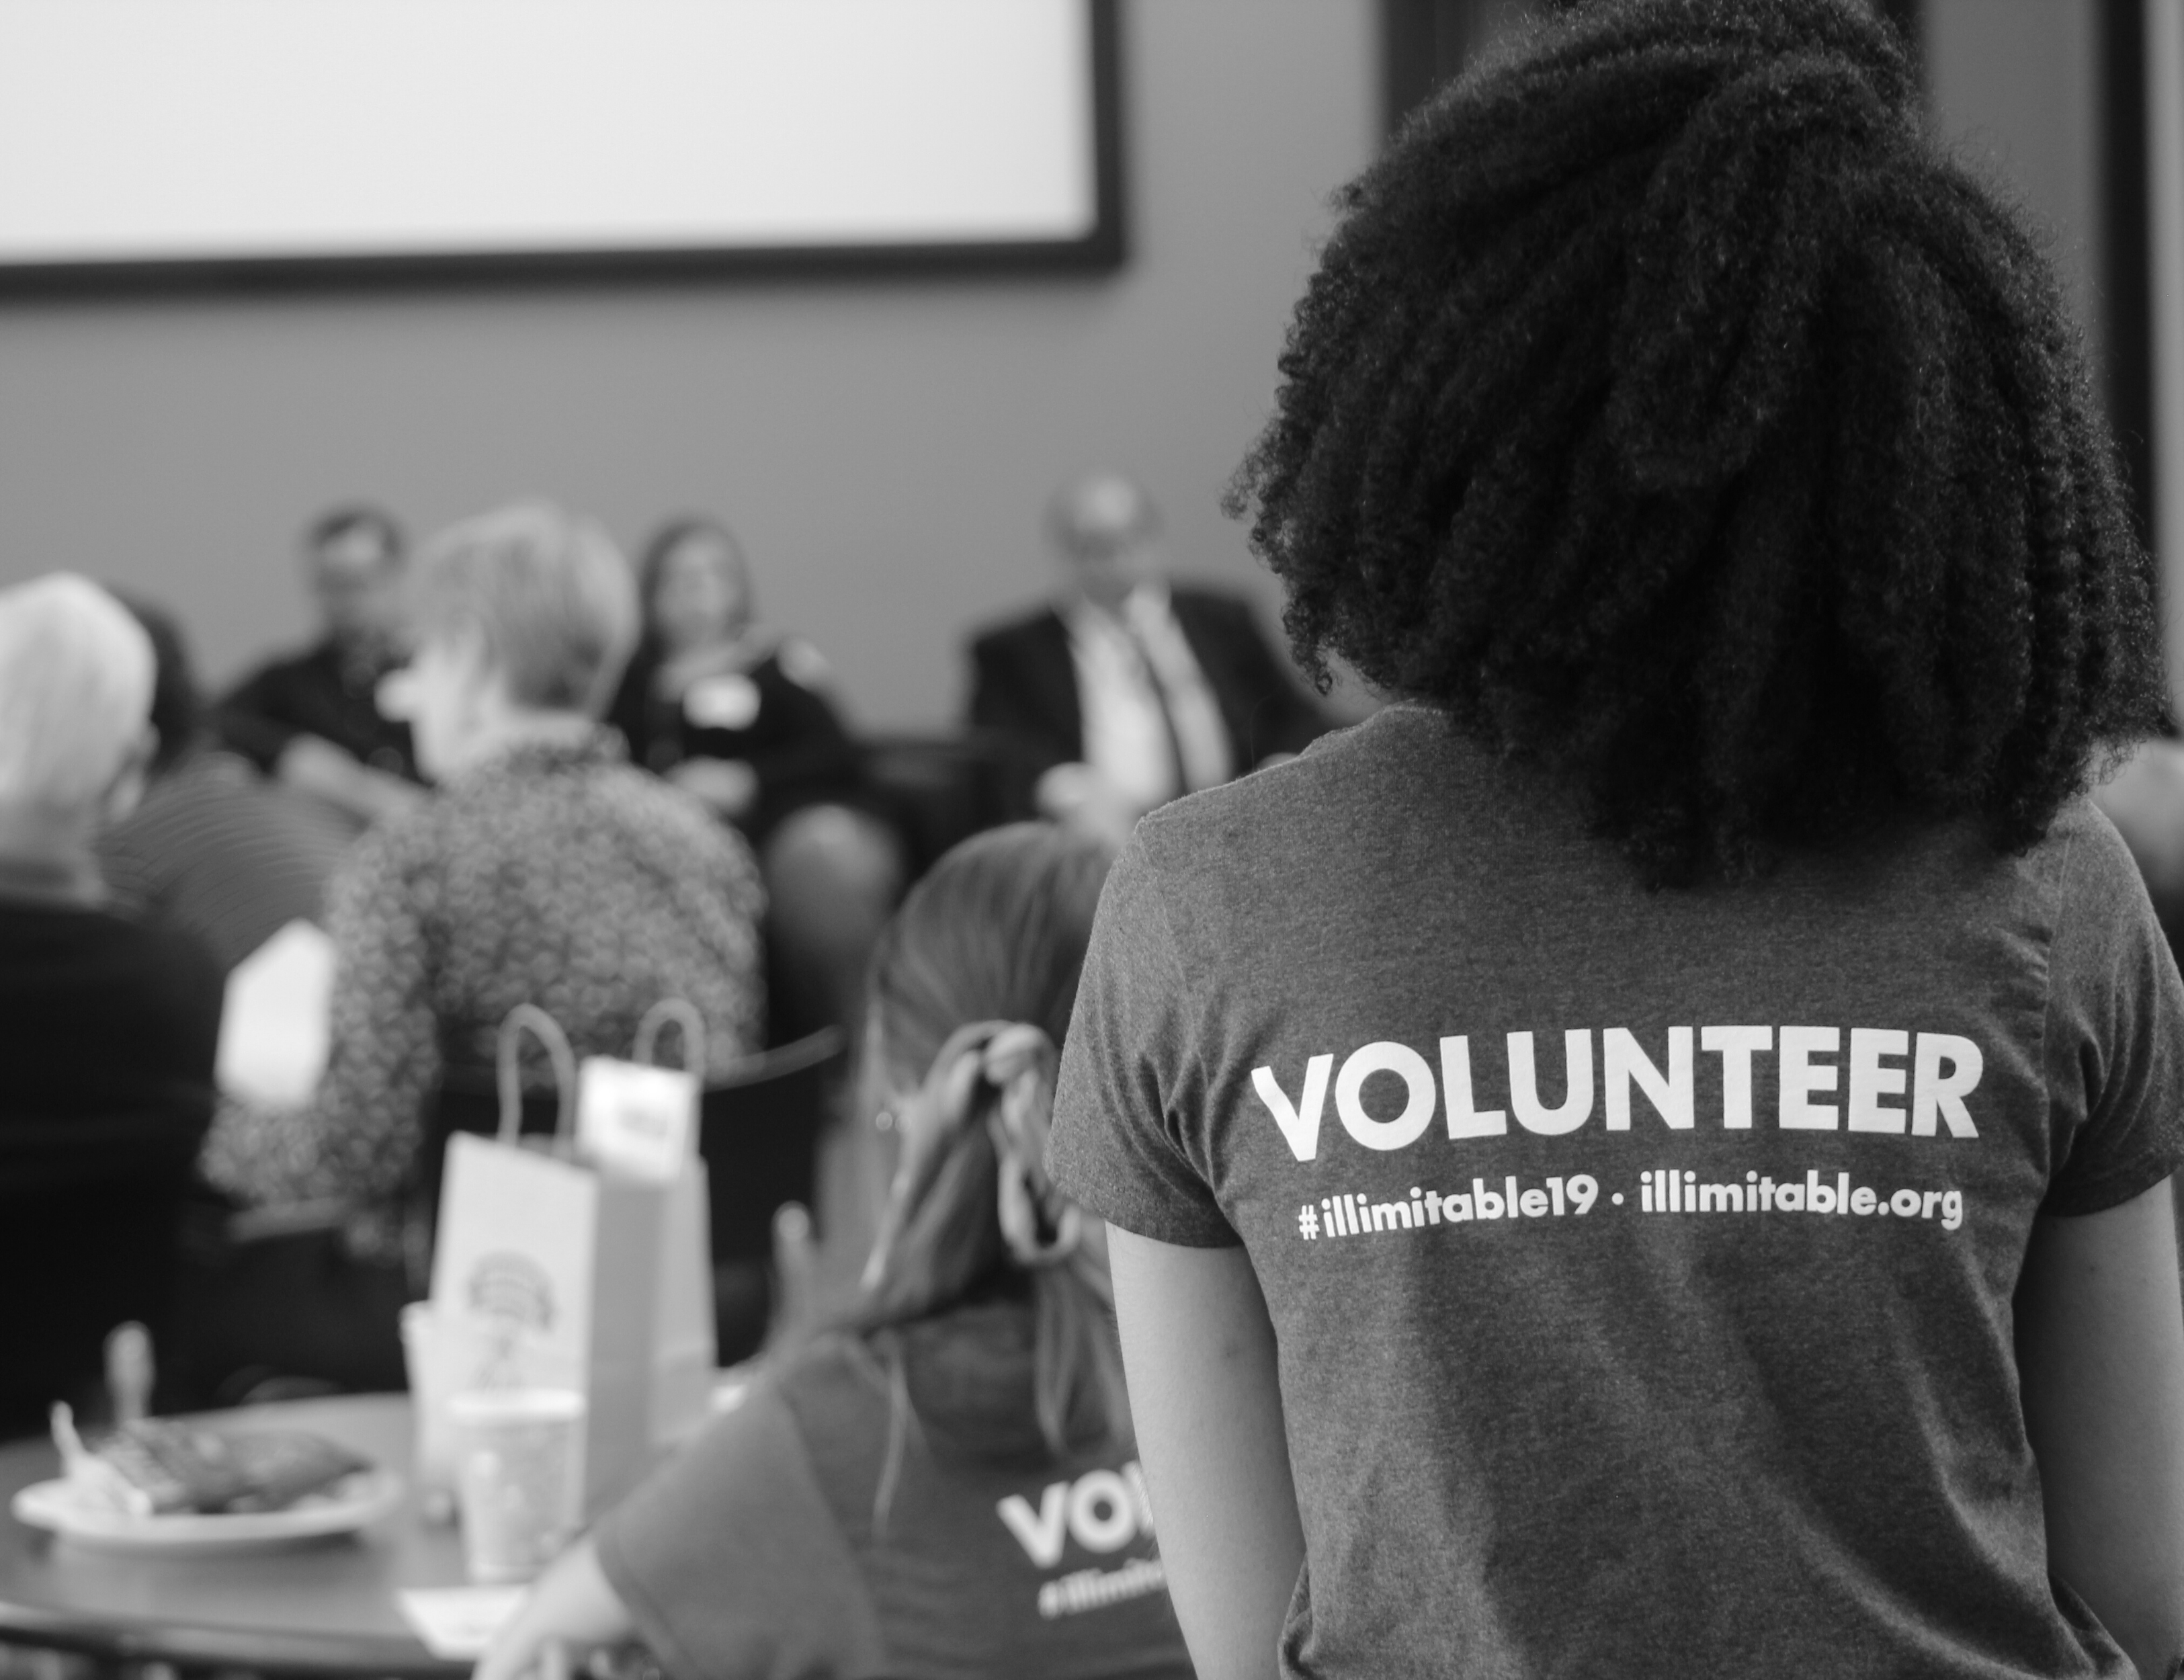 An African-American woman wearing an Illimitable tee shirt faces away from the camera. A group of panelists, the audience, and gift bags from vendors are visible in the background.